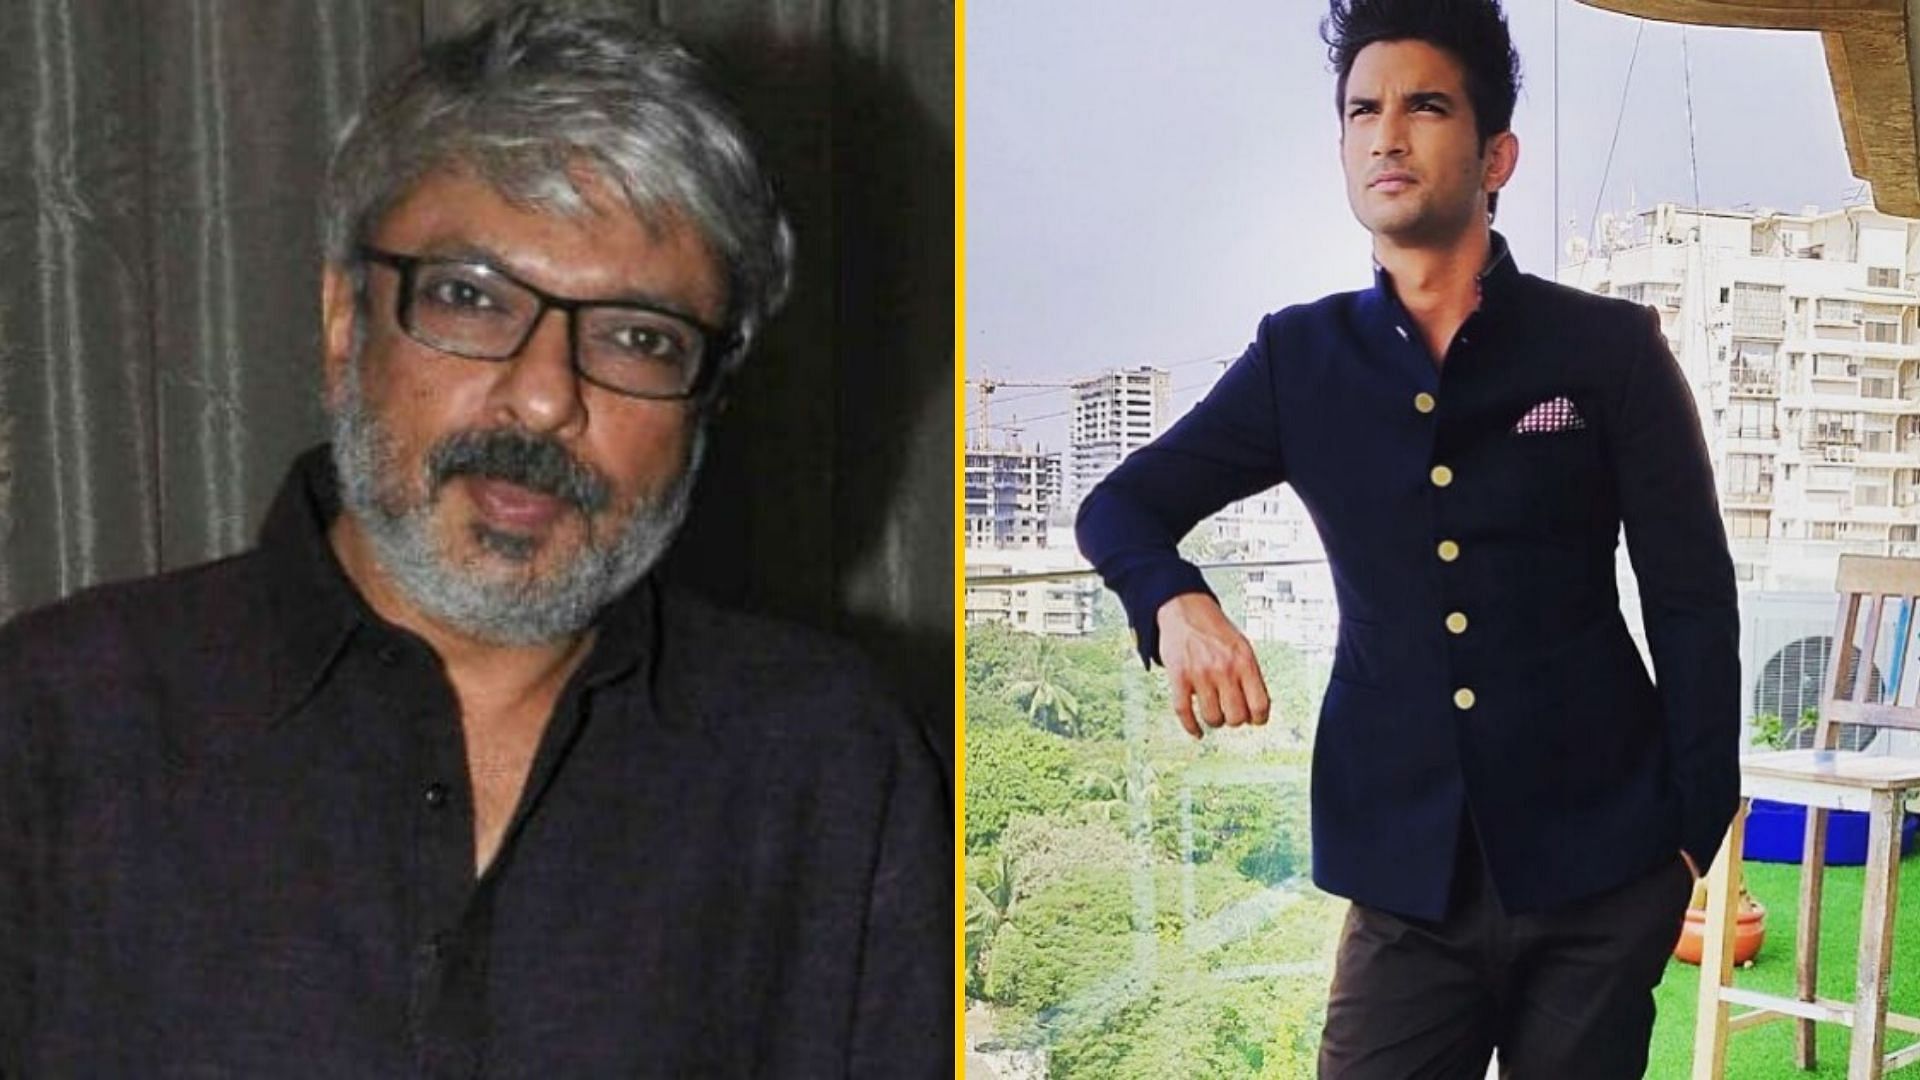 Sanjay Leela Bhansali has been questioned by Mumbai Police on his relationship with Sushant Singh Rajput.